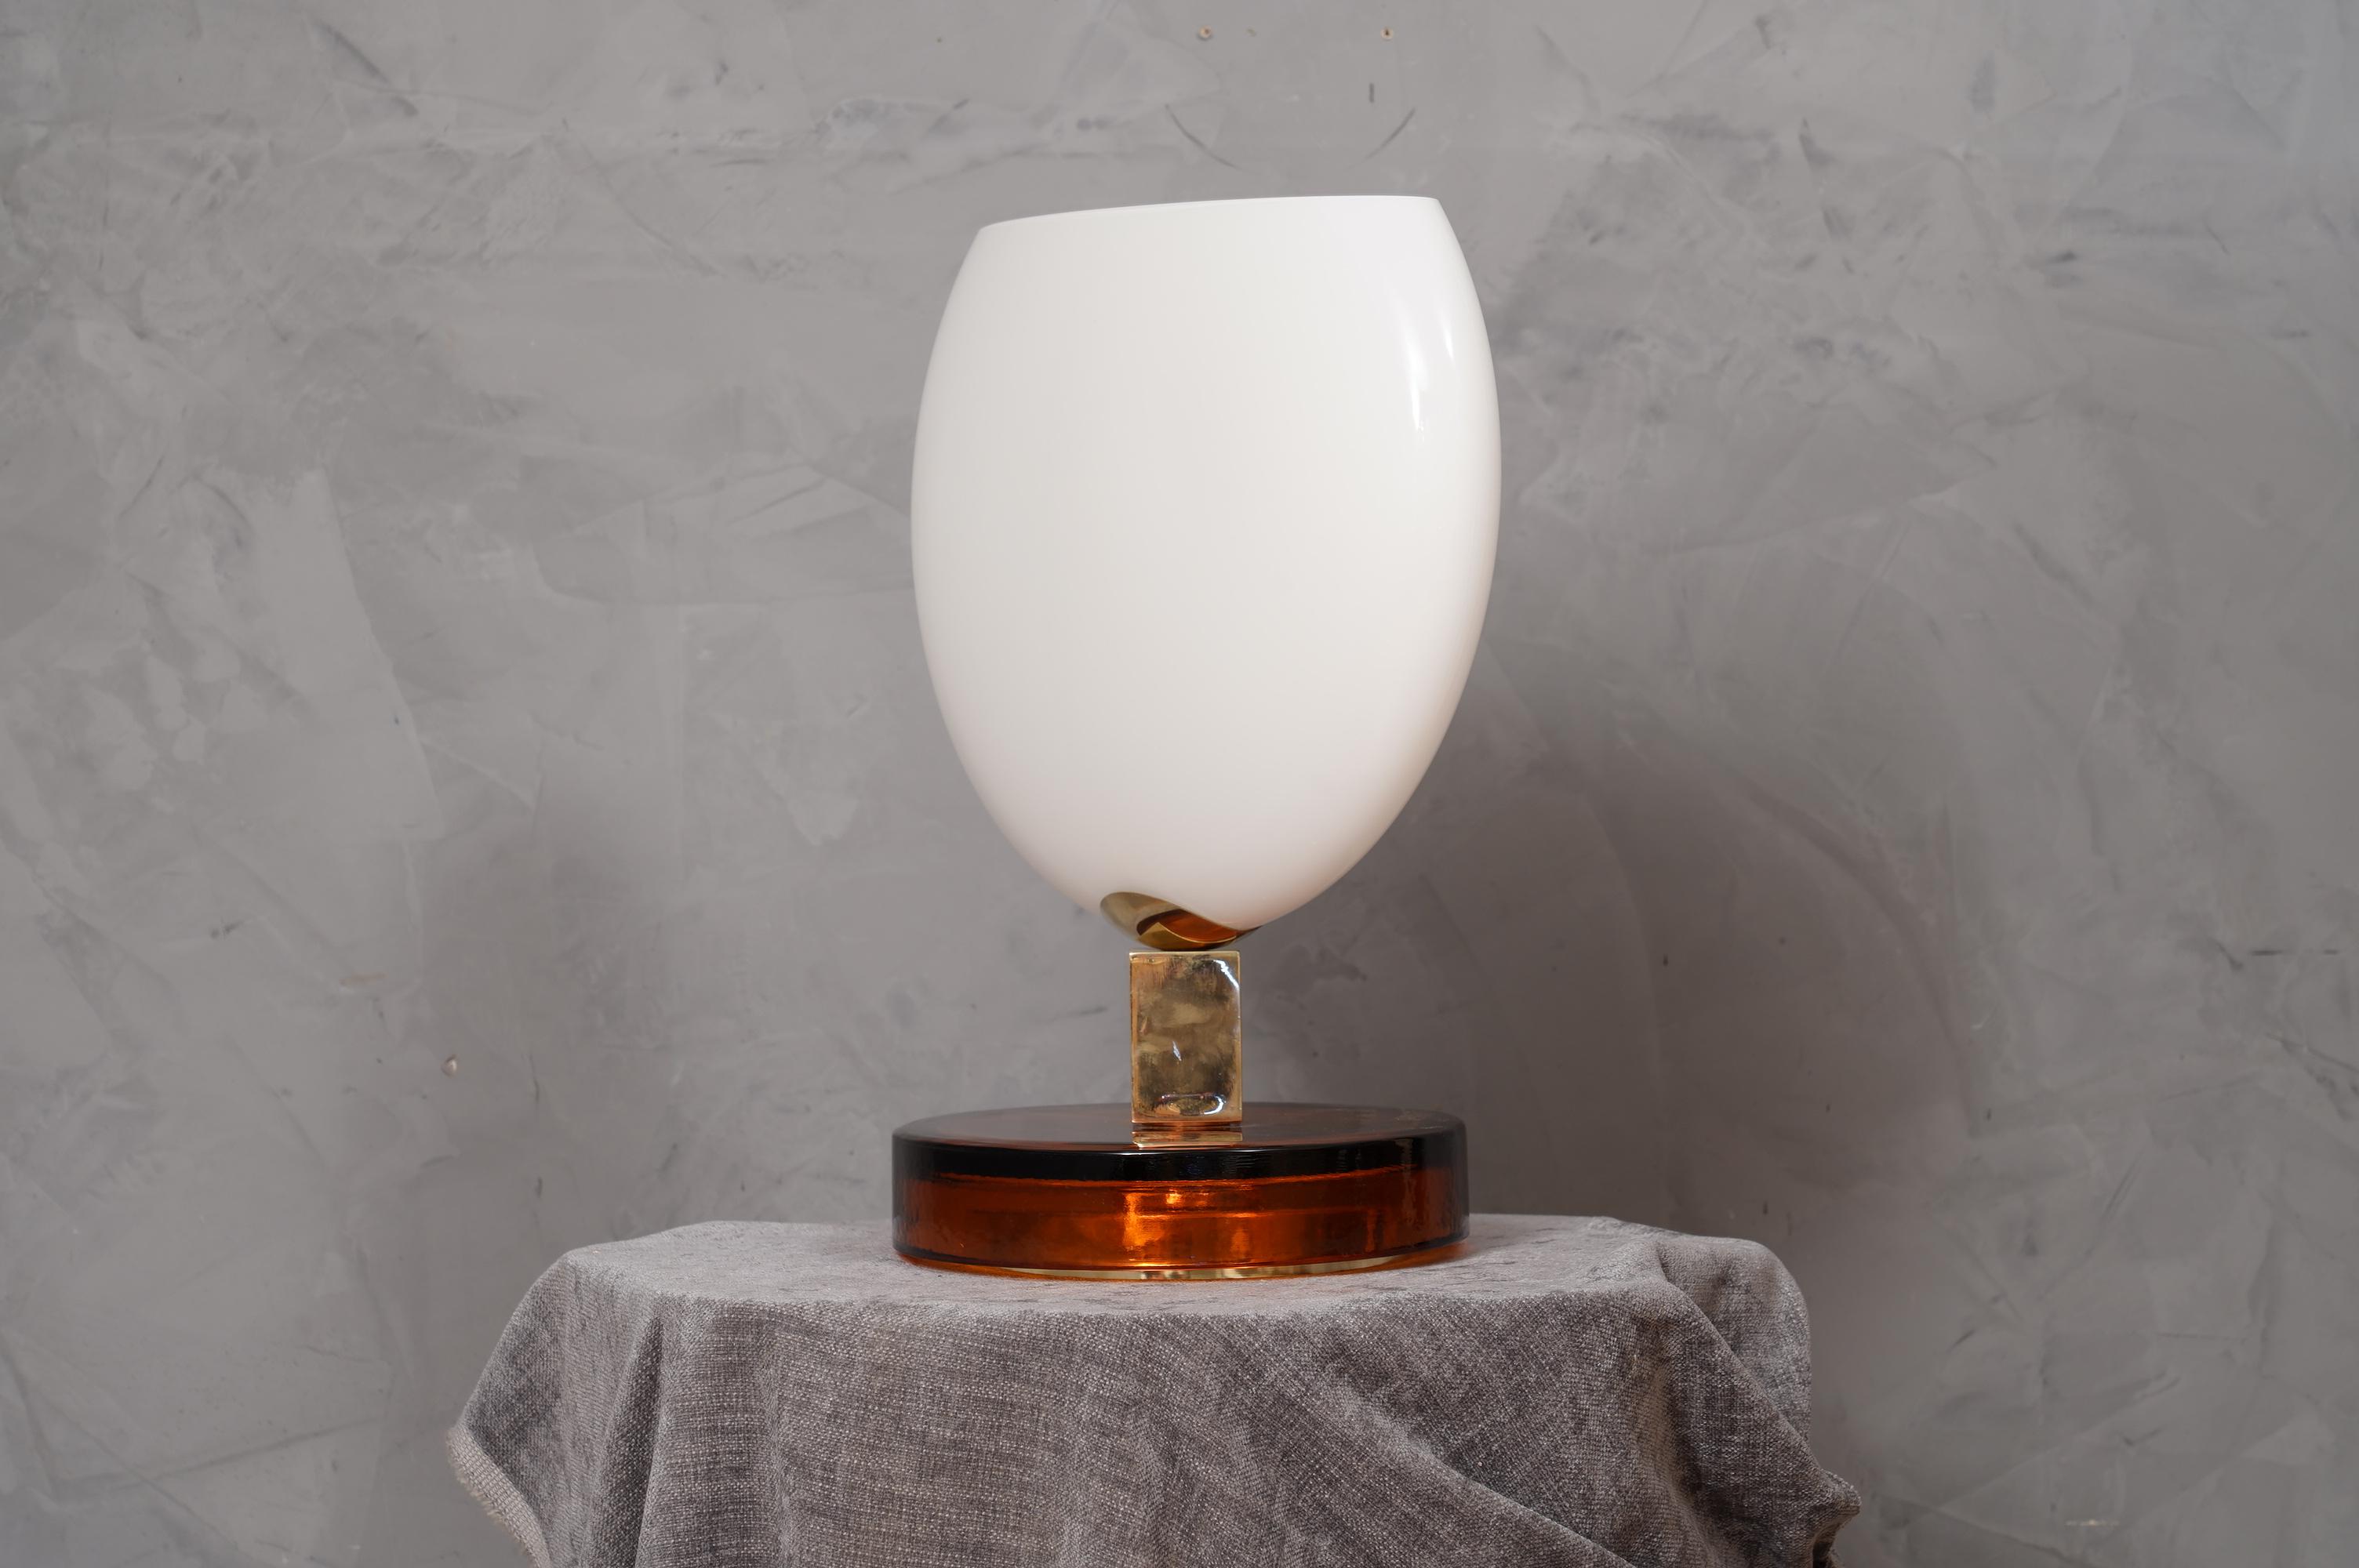 Precious and unique hand-blown Murano white glass, classic but original design with a strong contrast between the white of the glass and the amber of its base lamp.

The lamp is composed of a round base in Murano amber glass, above it is positioned